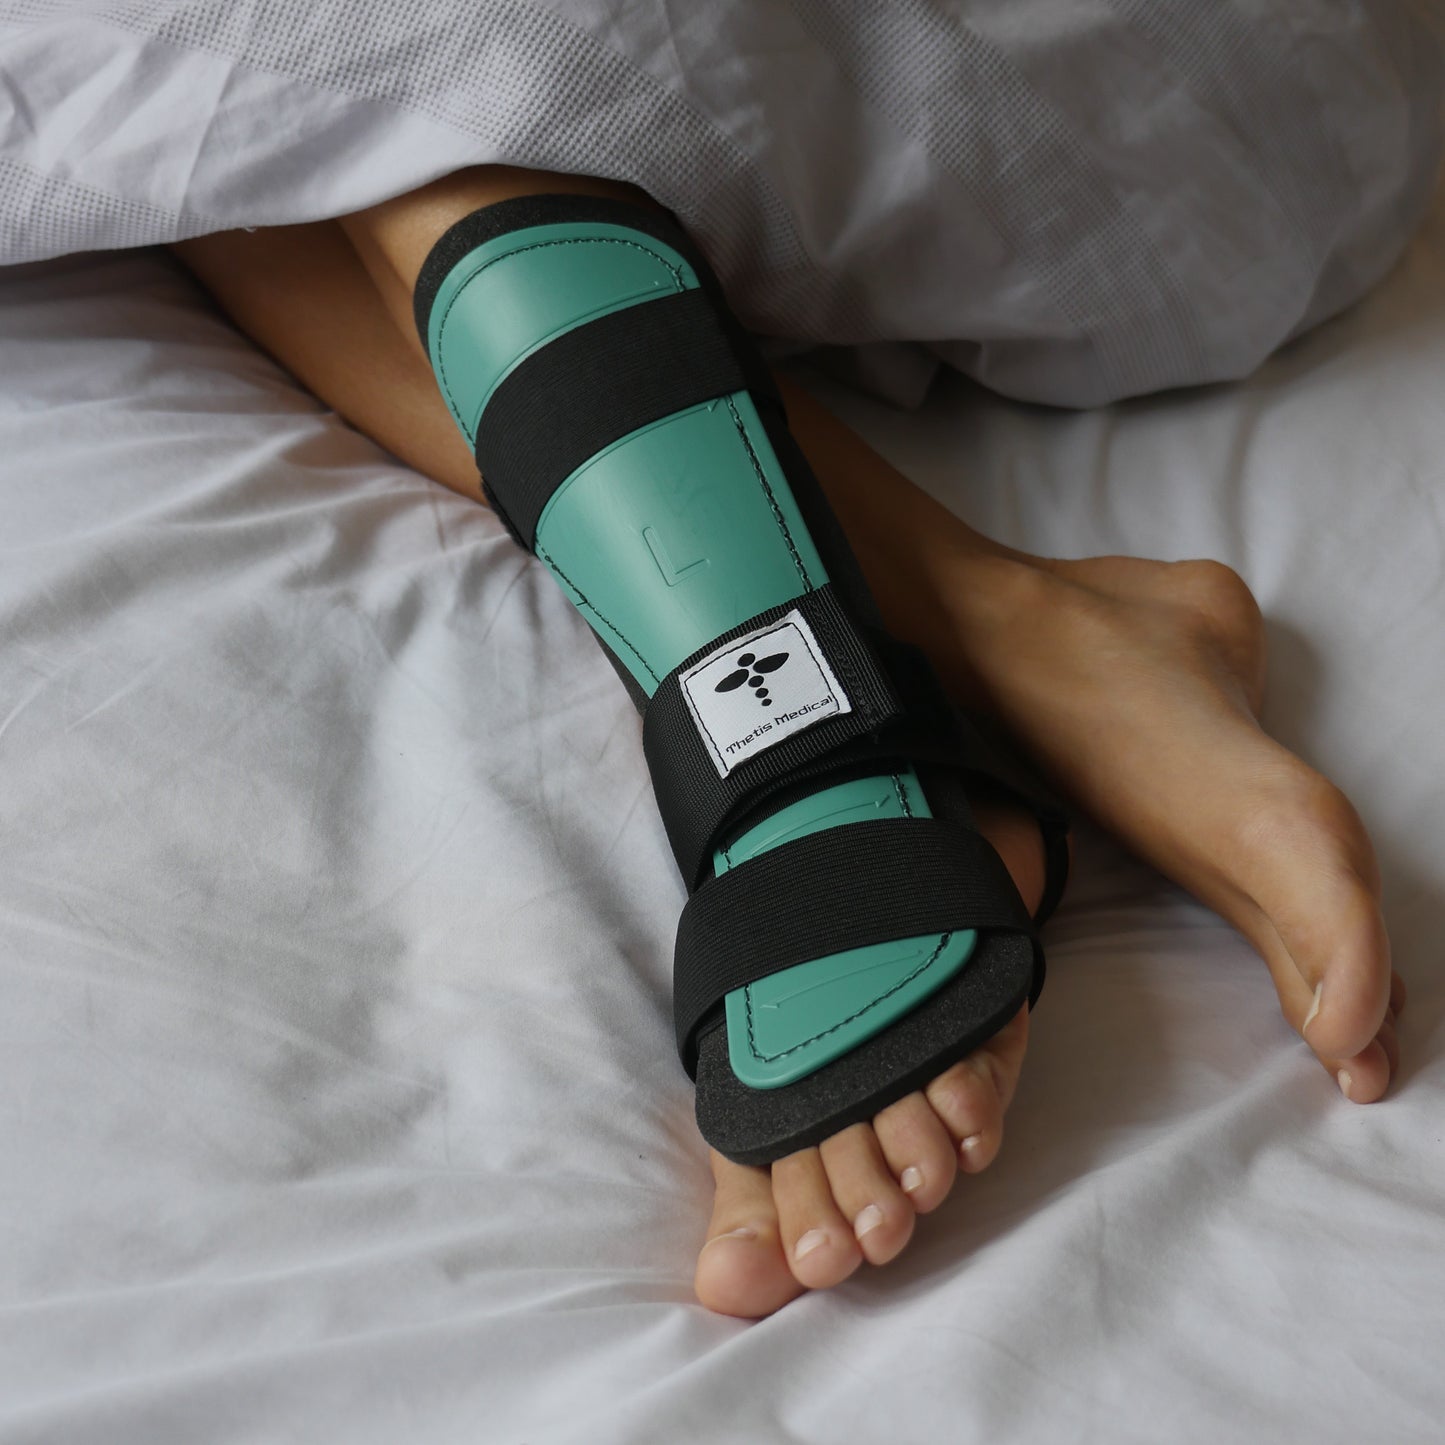 Thetis Medical Achilles Rupture Splint in-use in bed 